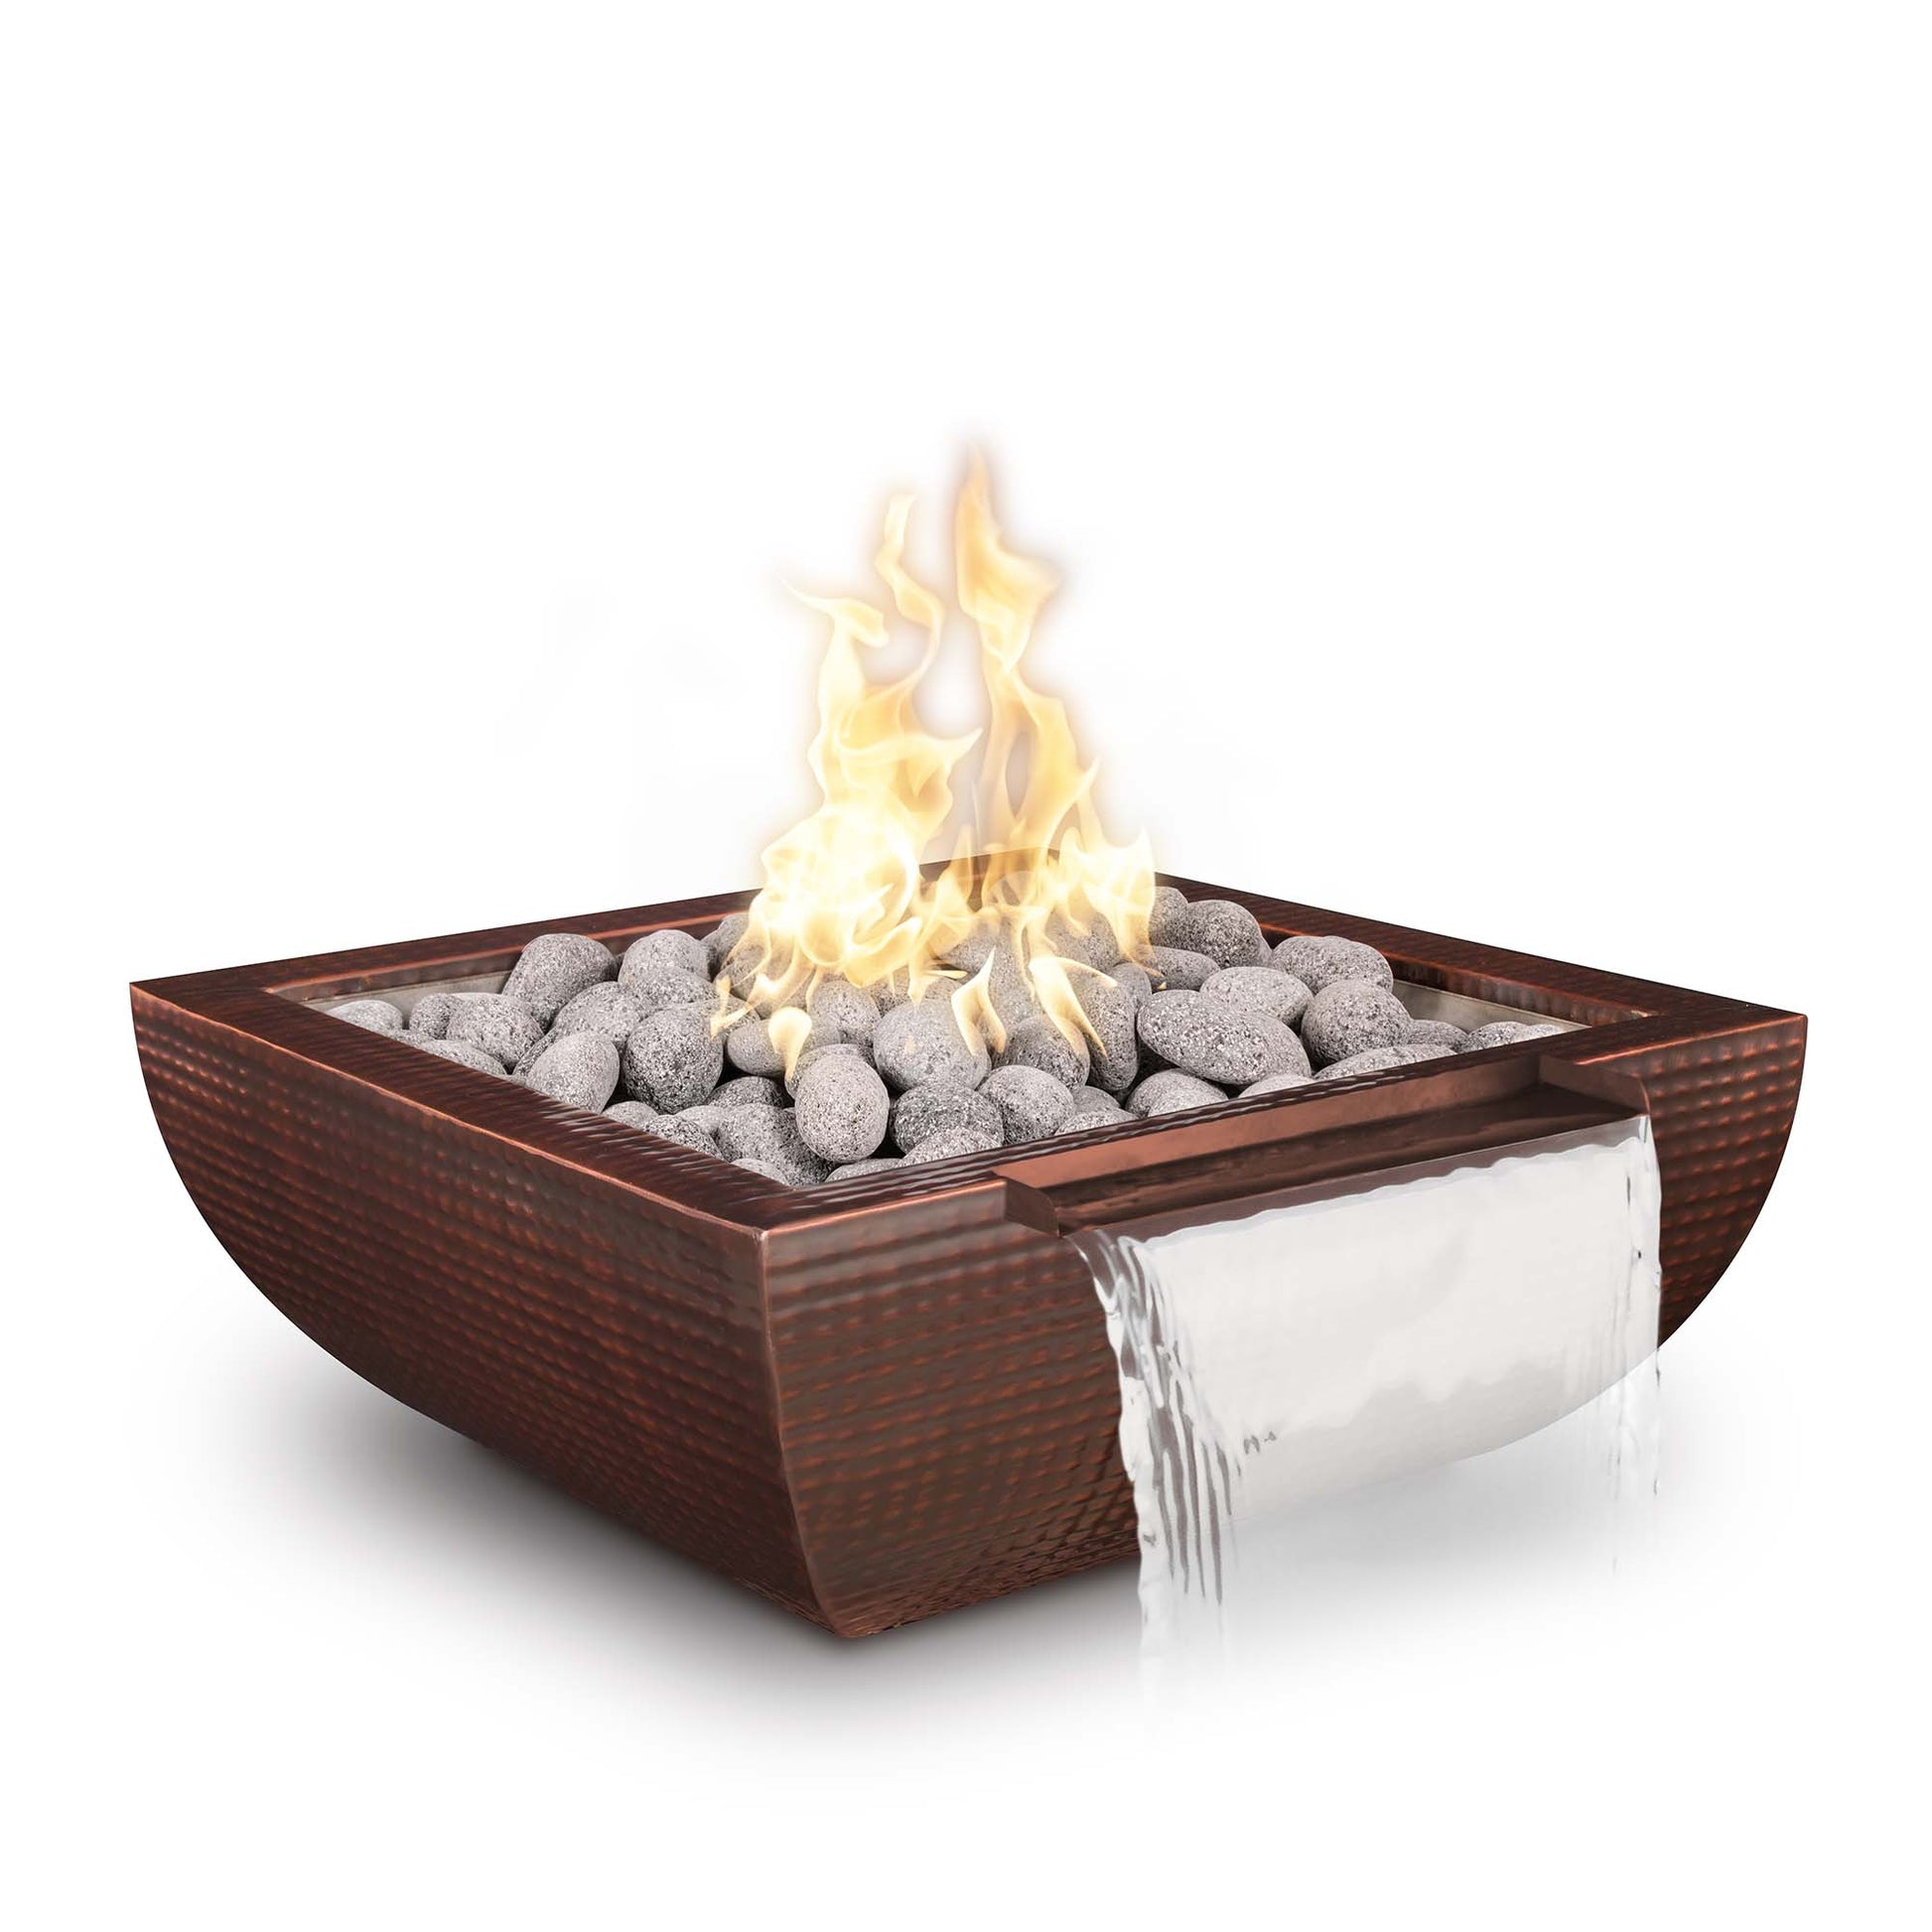 The Outdoor Plus Avalon Wide Spill 24" Java Powder Coated Metal Liquid Propane Fire & Water Bowl with Match Lit with Flame Sense Ignition